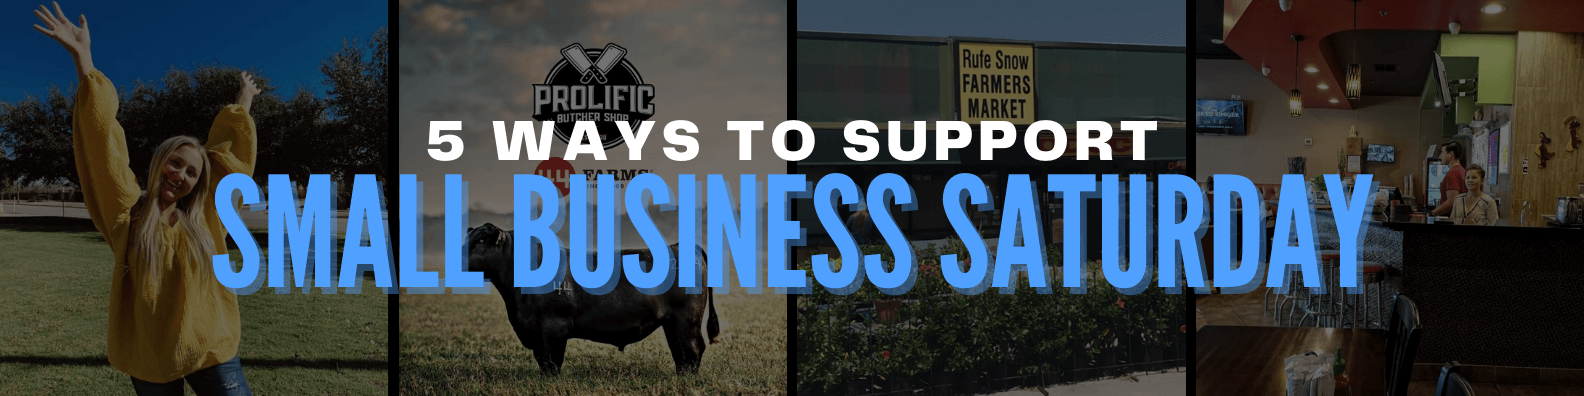 5 Ways to Support Small Business Saturday in Watauga Banner